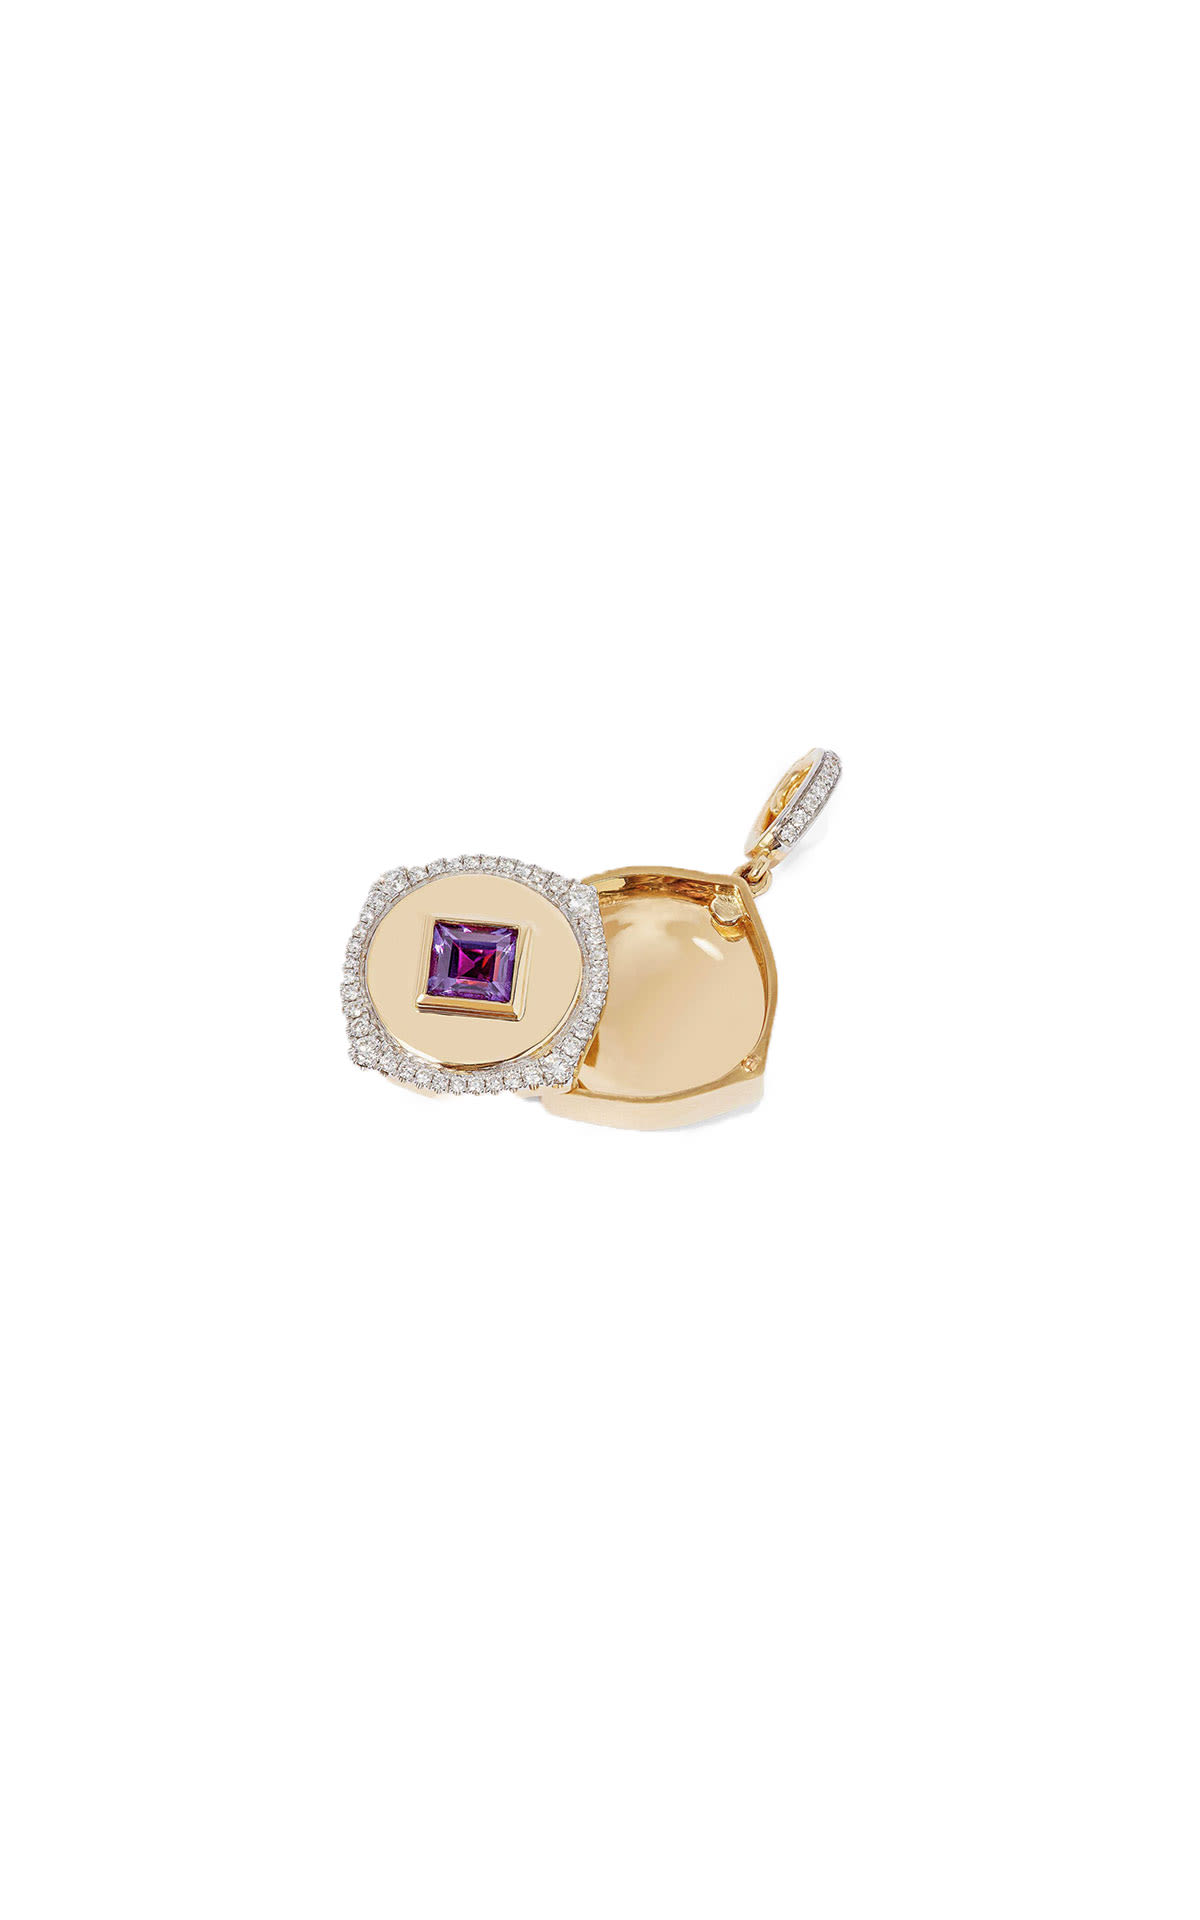 Annoushka February amethyst from Bicester Village